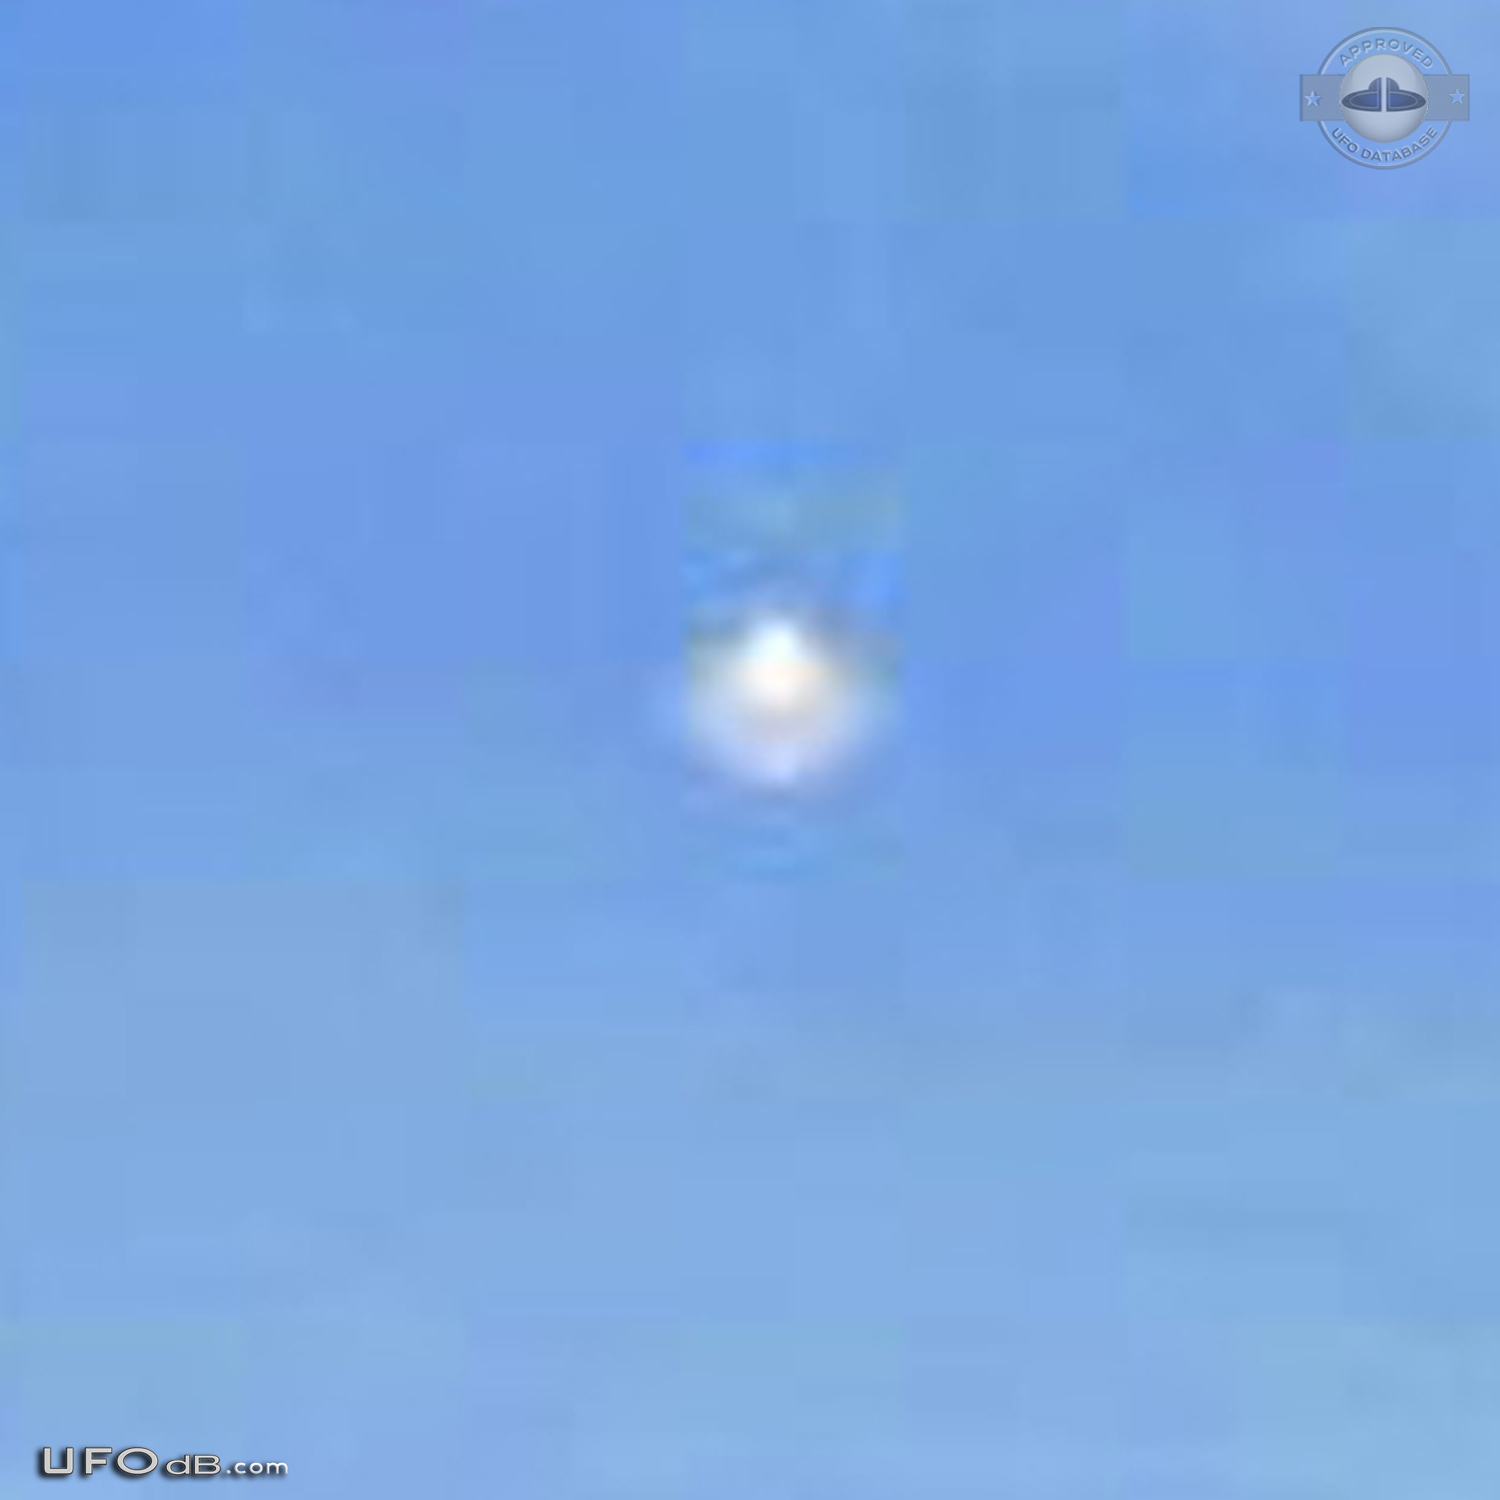 UFO splits into two parts over North Pembrokeshire Wales UK 2014 UFO Picture #593-4